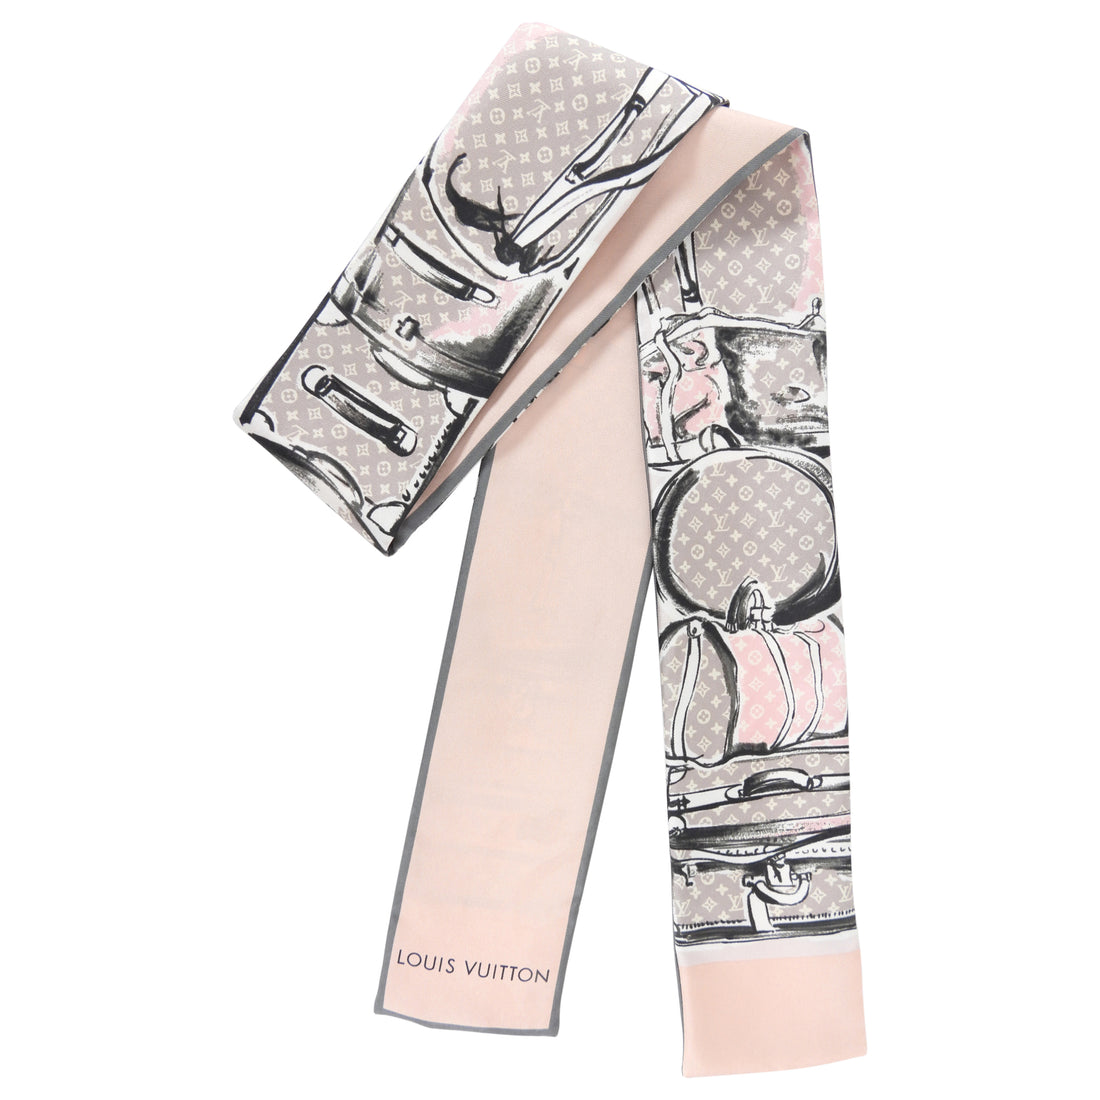 Pink and grey never goes wrong #louis vuitton #bandeau